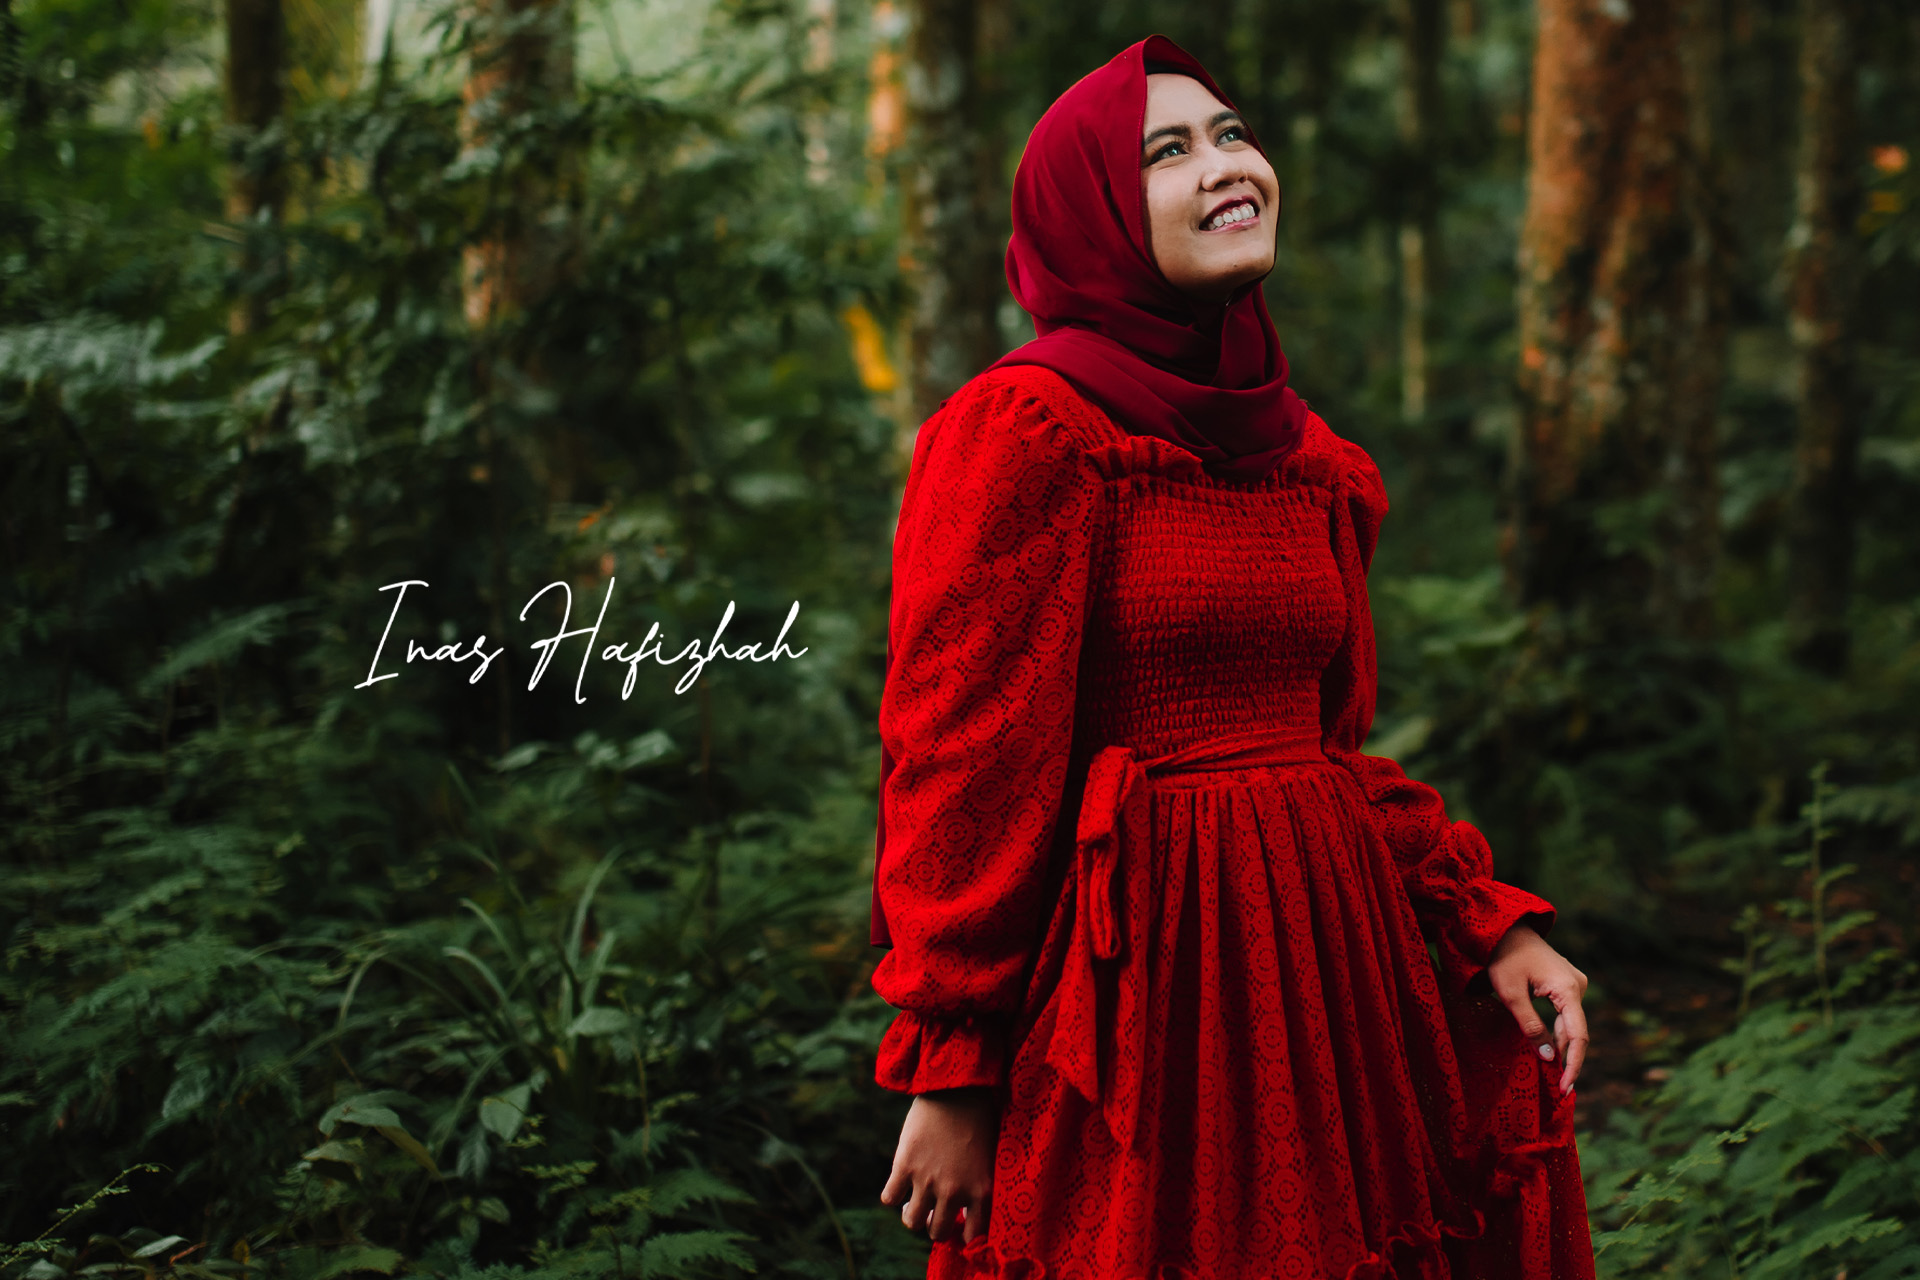 Inas Hafizhah Gallery